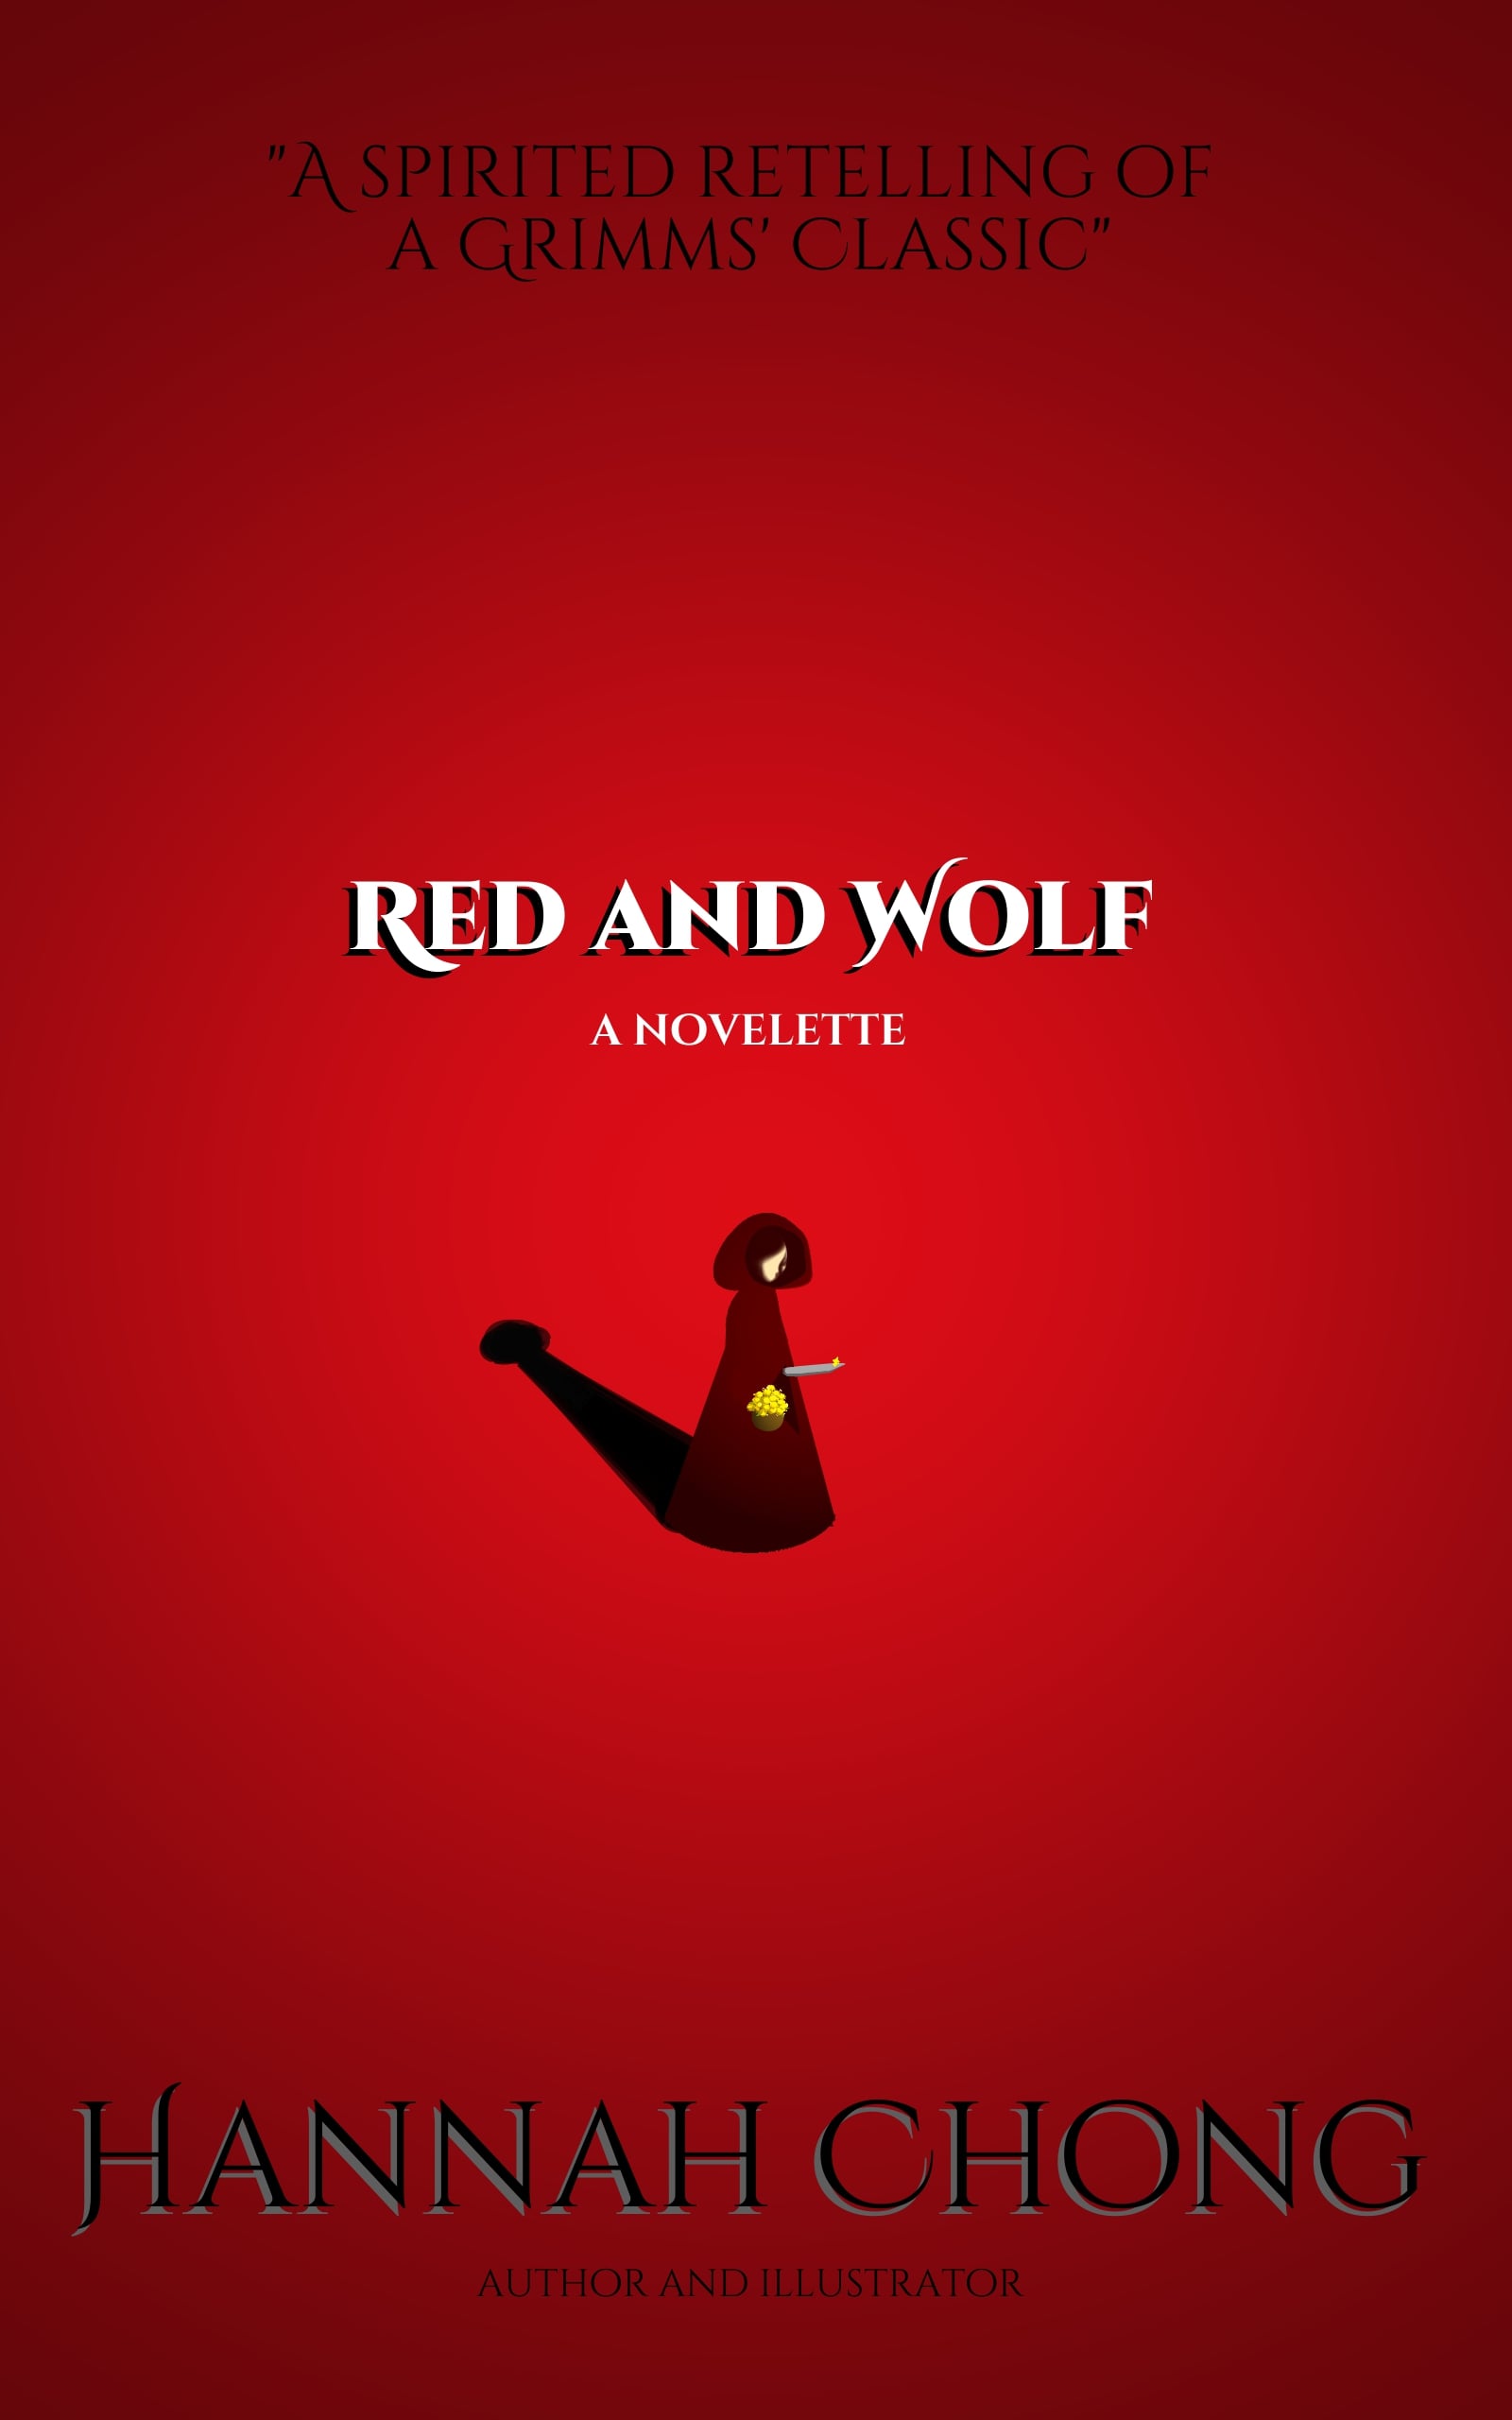 FREE: Red and Wolf: A Spirited Retelling of a Grimms’ Classic by Hannah Chong